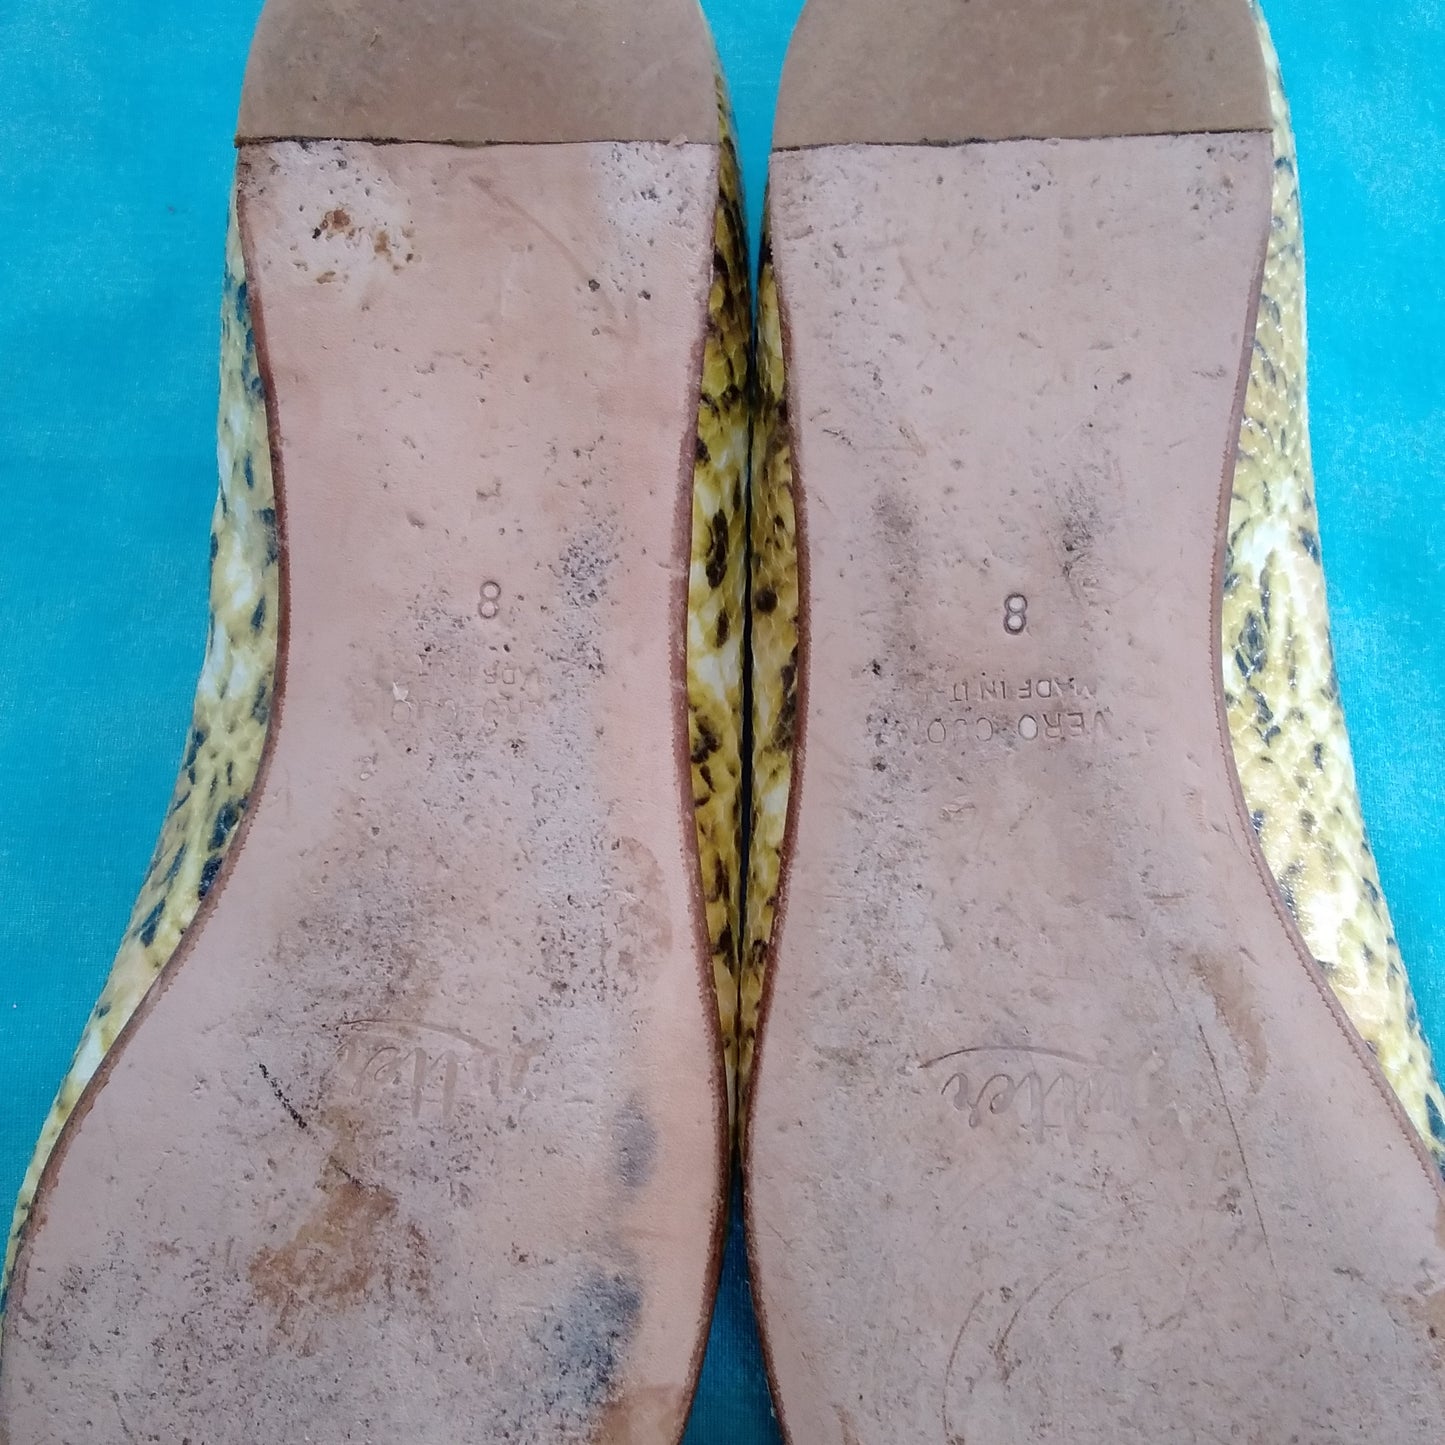 Butter Yellow/Black Floral Flats with Gold Tips made in Italy - Size: 8